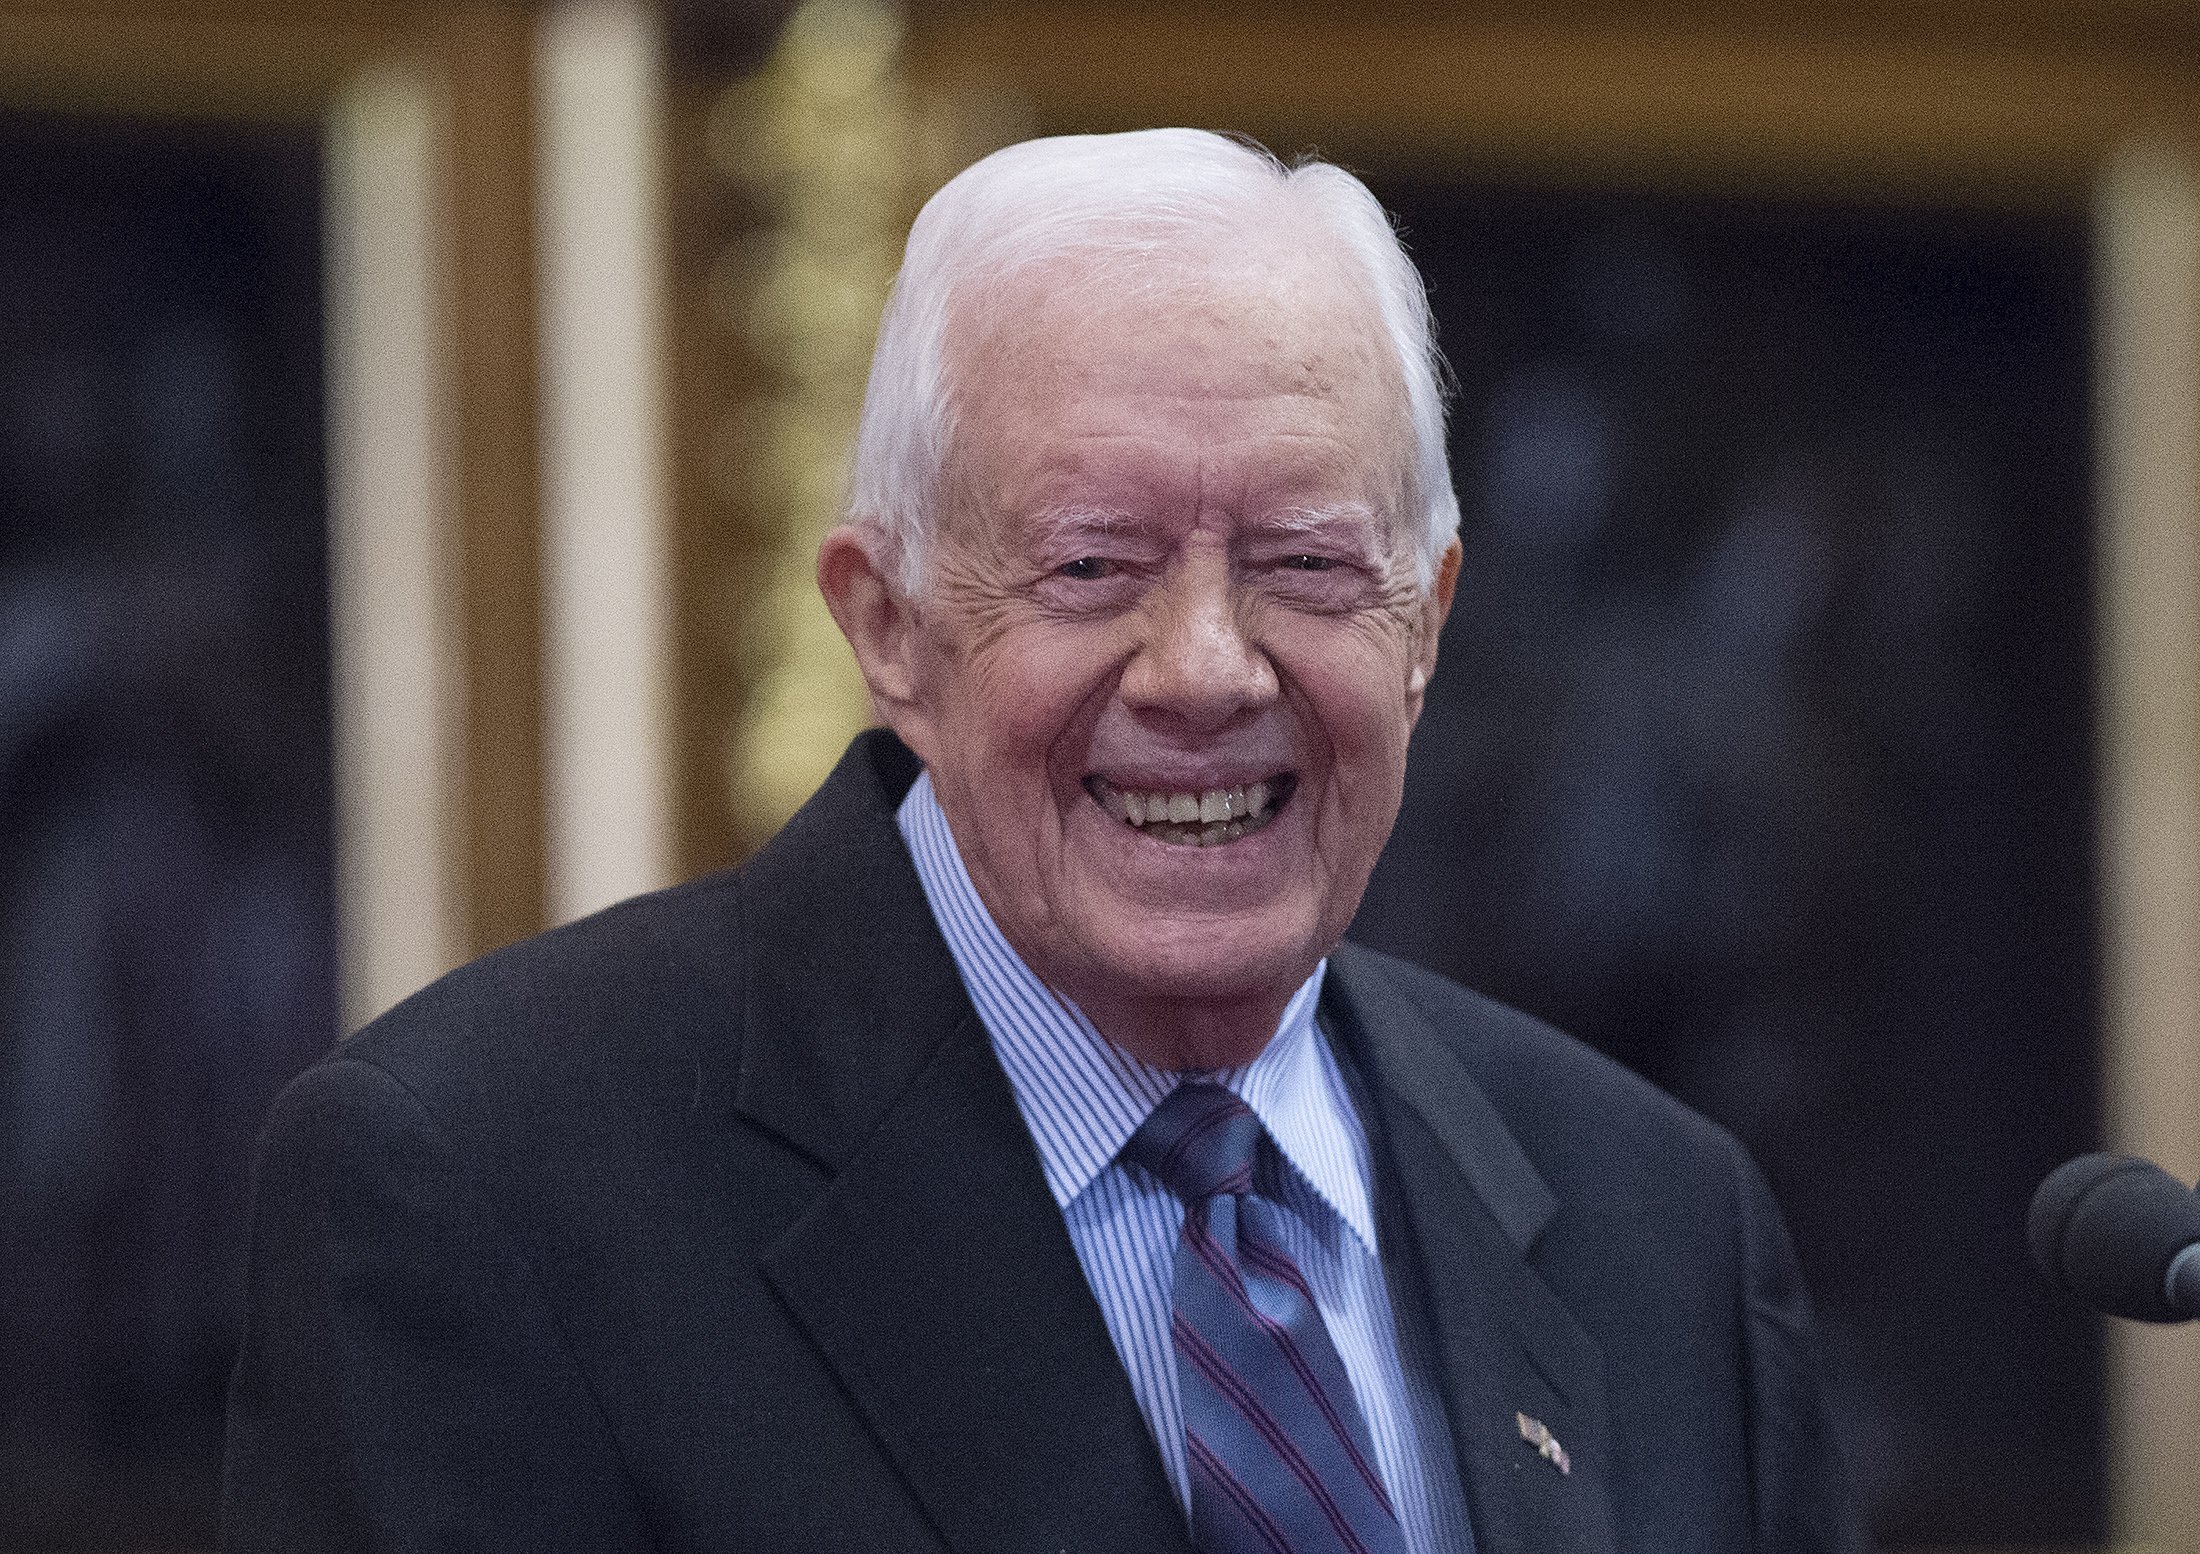 Former US President Jimmy Carter delivers a lecture on the eradication of the Guinea worm, at the House of Lords on February 3, 2016 in London | Photo: Getty Images